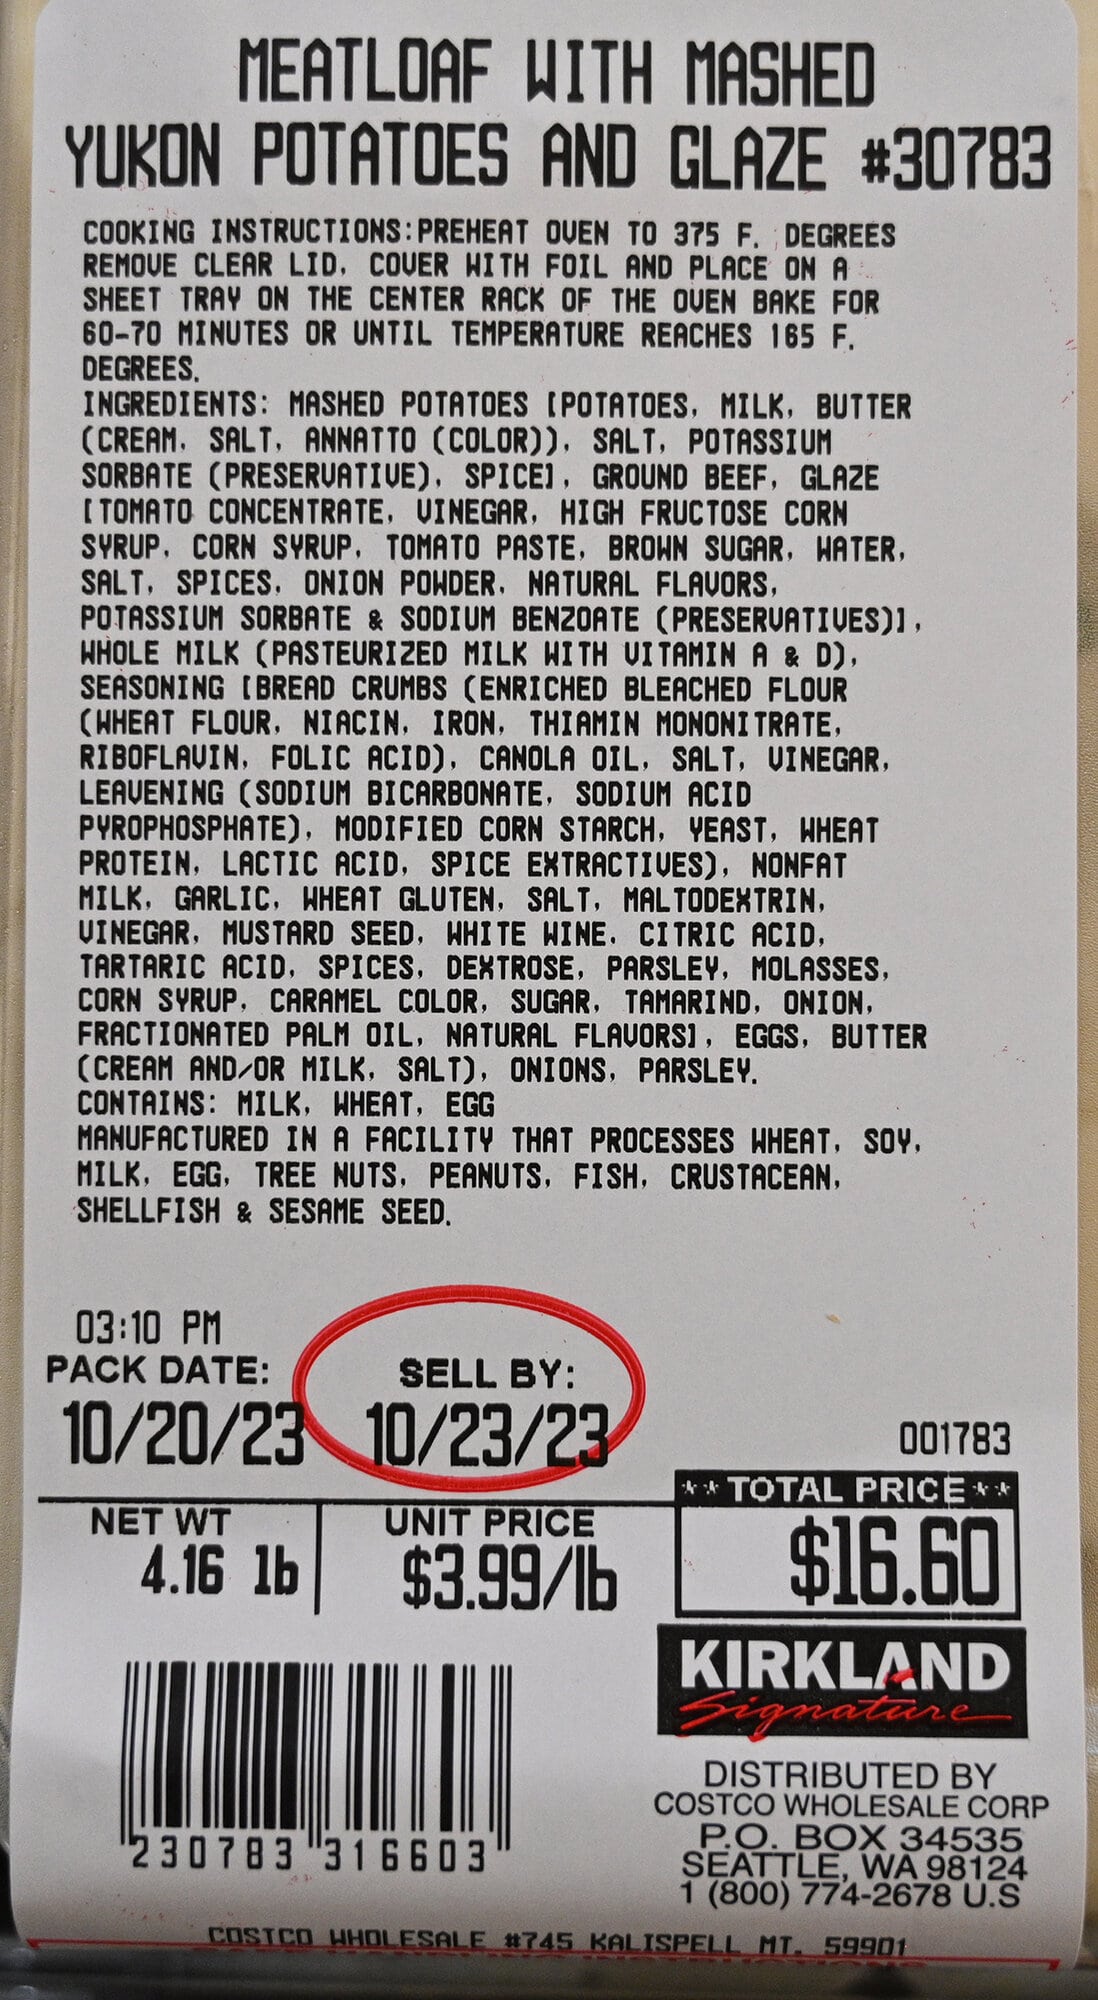 Closeup image of the front label on the meatloaf and mashed potatoes showing cost, ingredients and best before date.